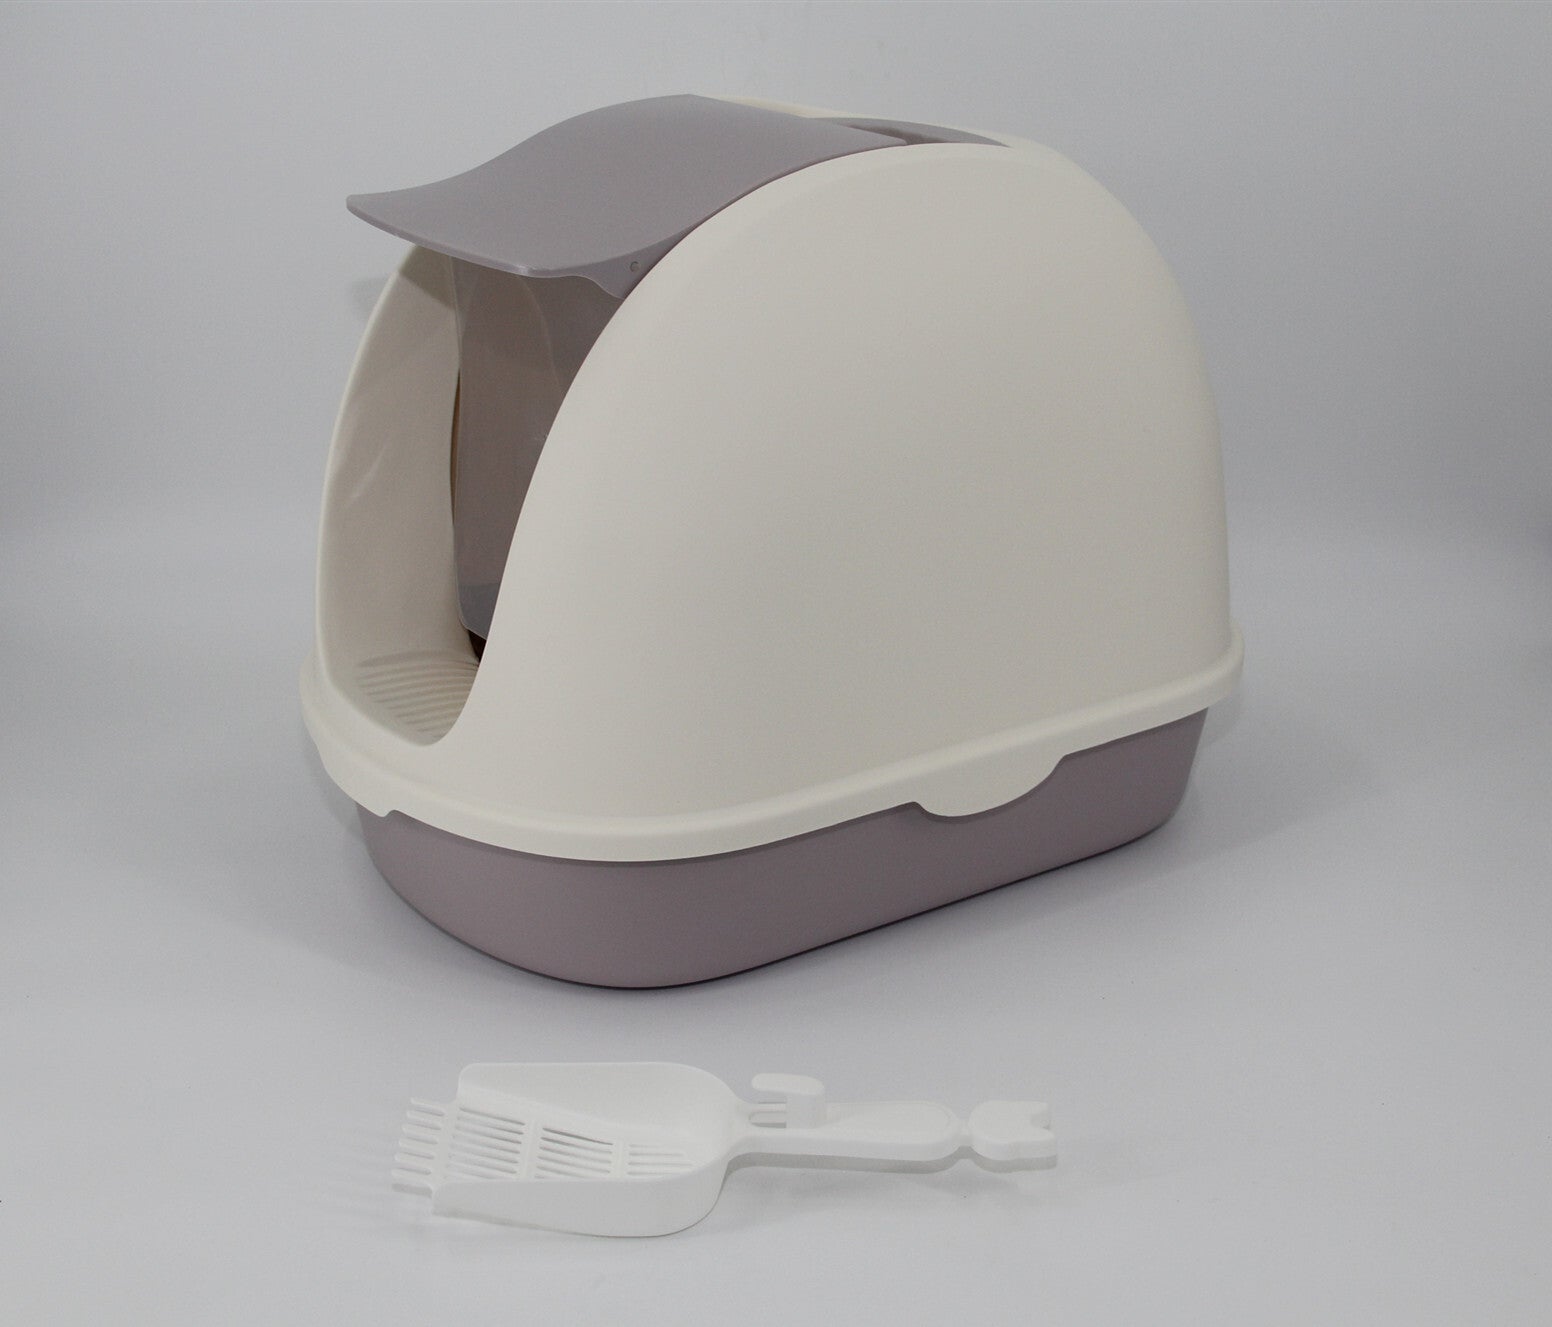 YES4PETS Portable Hooded Cat Toilet Litter Box Tray House with Scoop and Grid Tray White